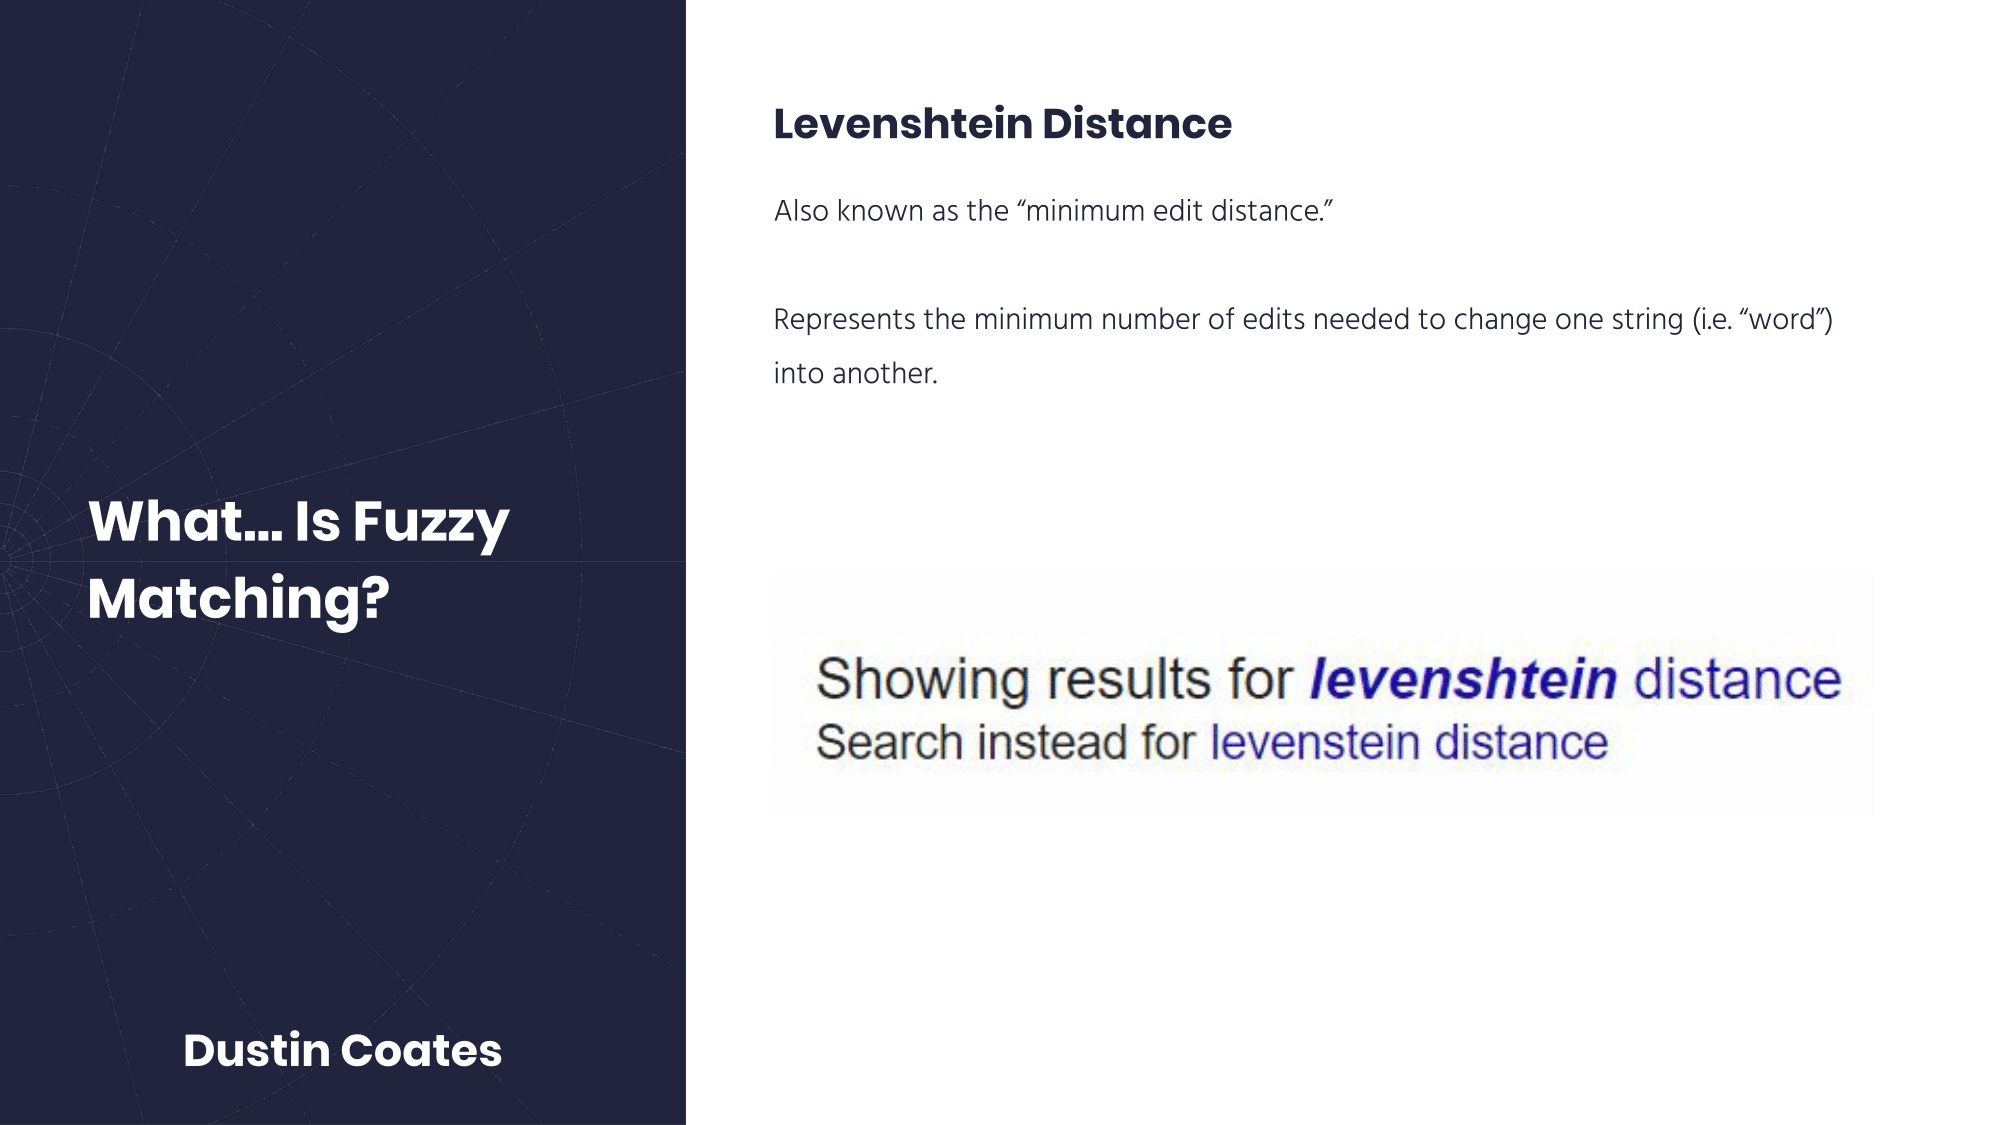 The levenshtein distance is the minimum edit distance between two strings